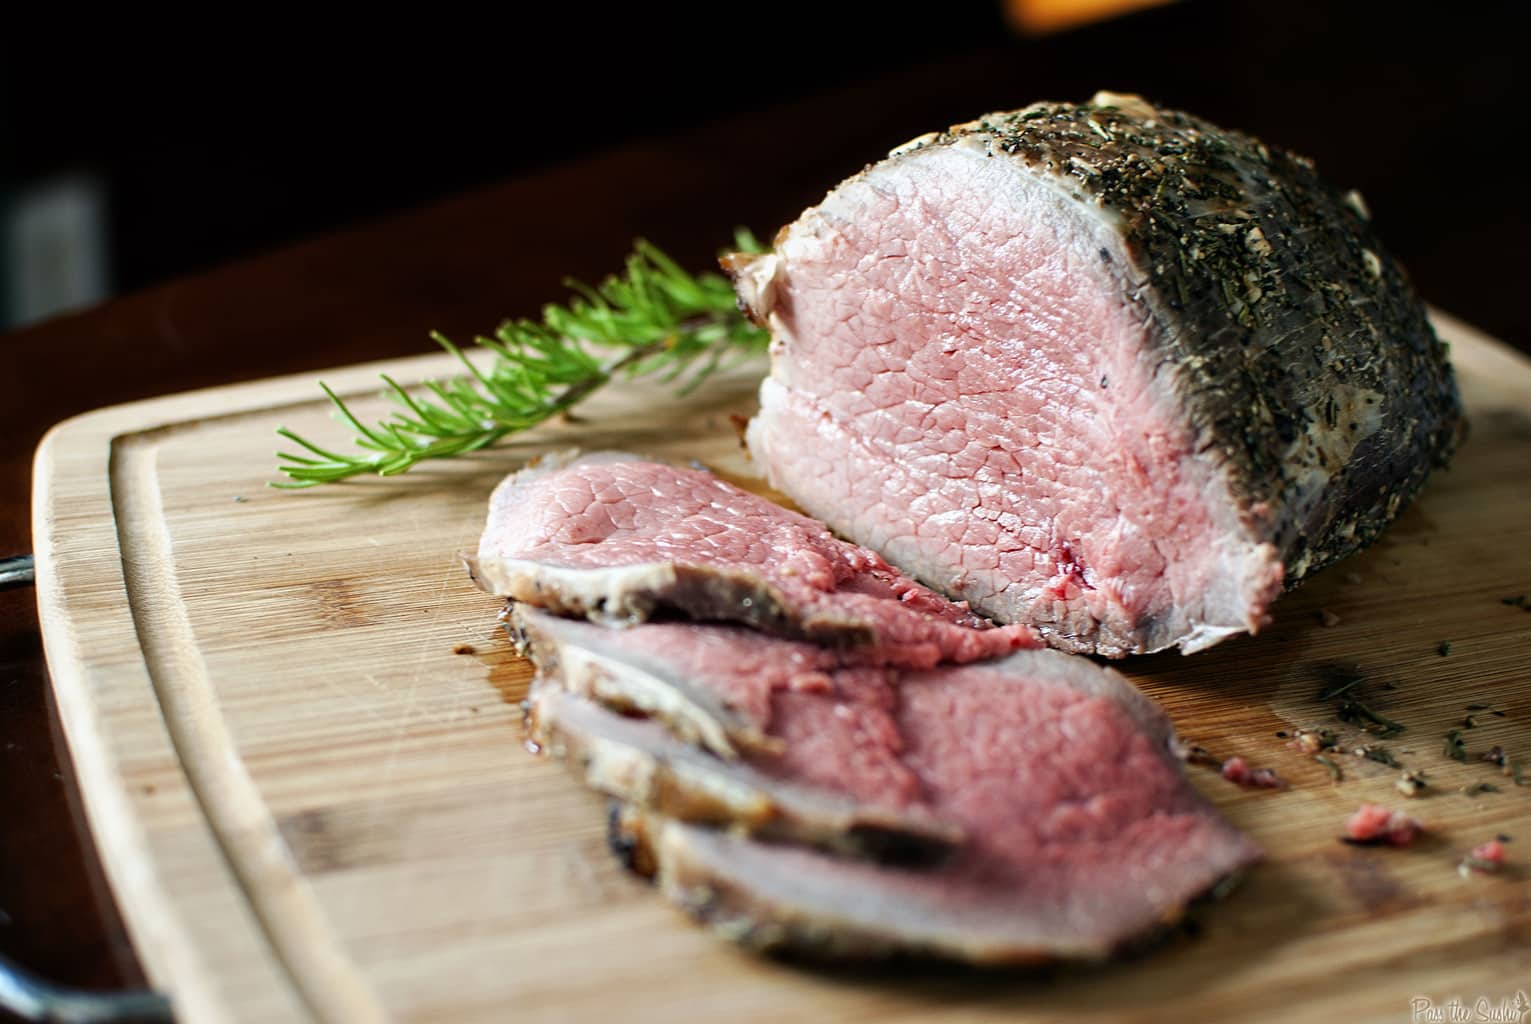 Grill-roasted beef is a classic beef sirloin roast, cooked to perfection on a charcoal or gas grill. A bit healthier and so much more delicious than oven-roasted beef. \ PassTheSushi.com